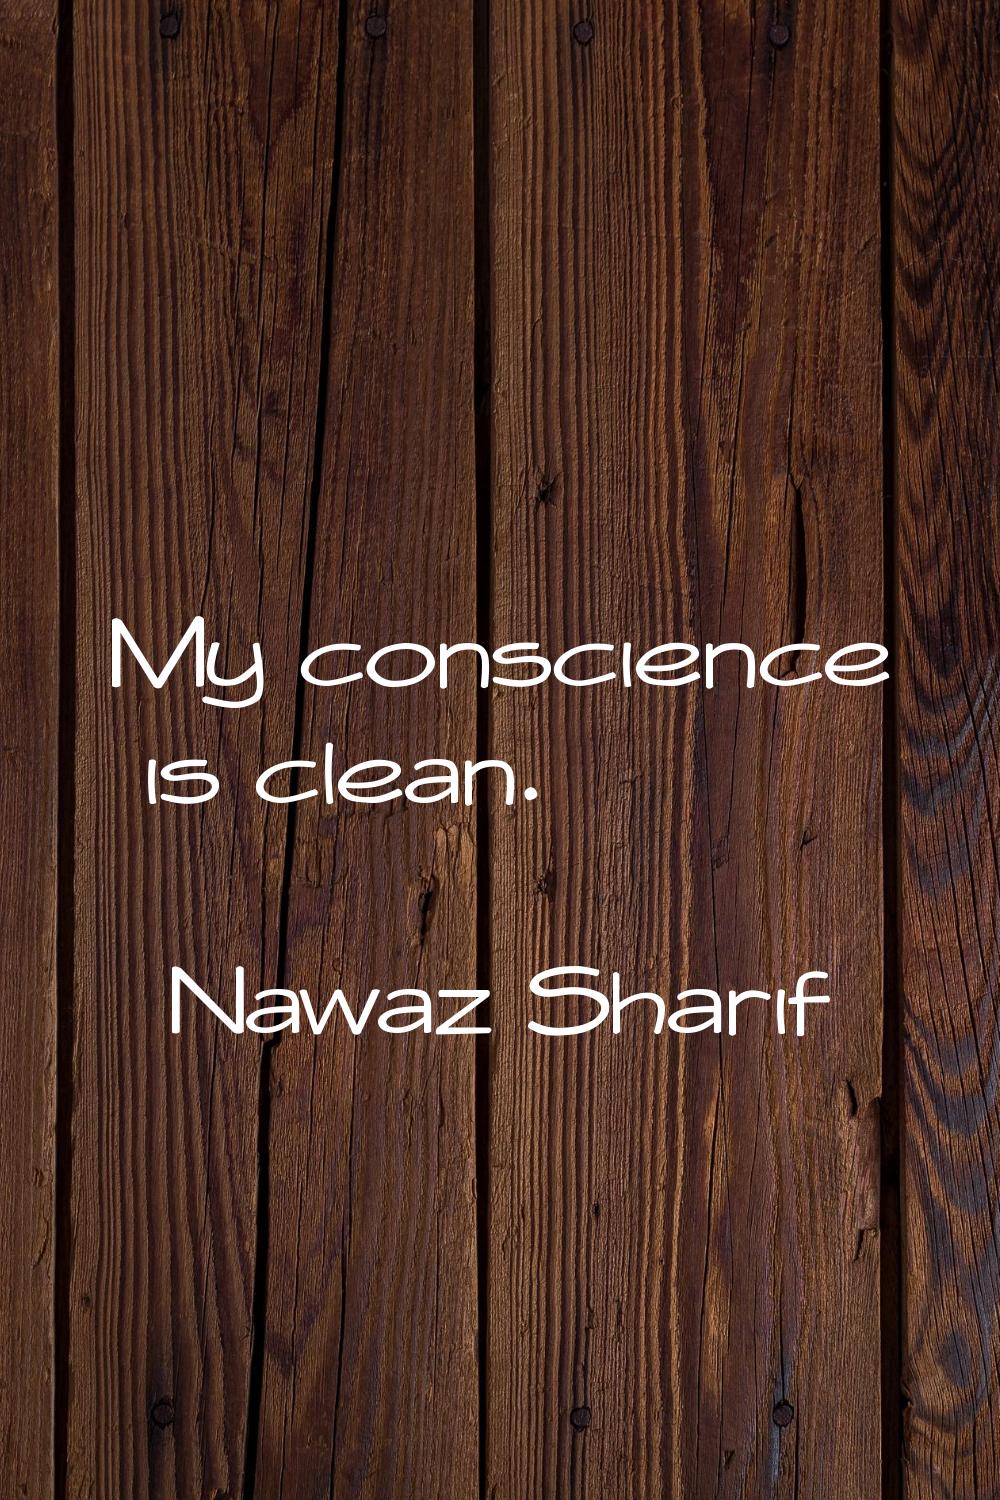 My conscience is clean.